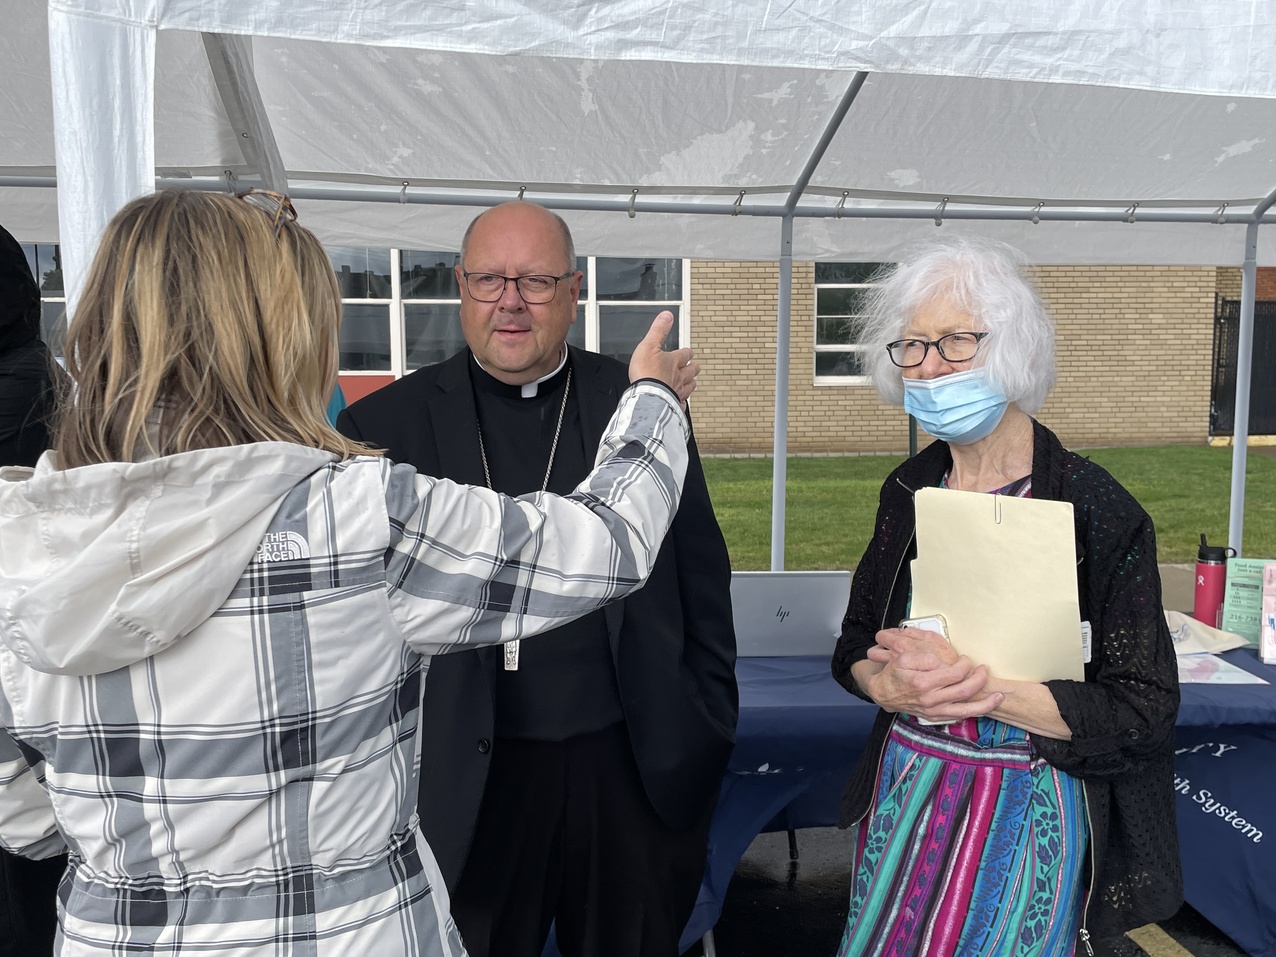 Bishop helps St. Vincent Charity Medical Center celebrate patronal feast day